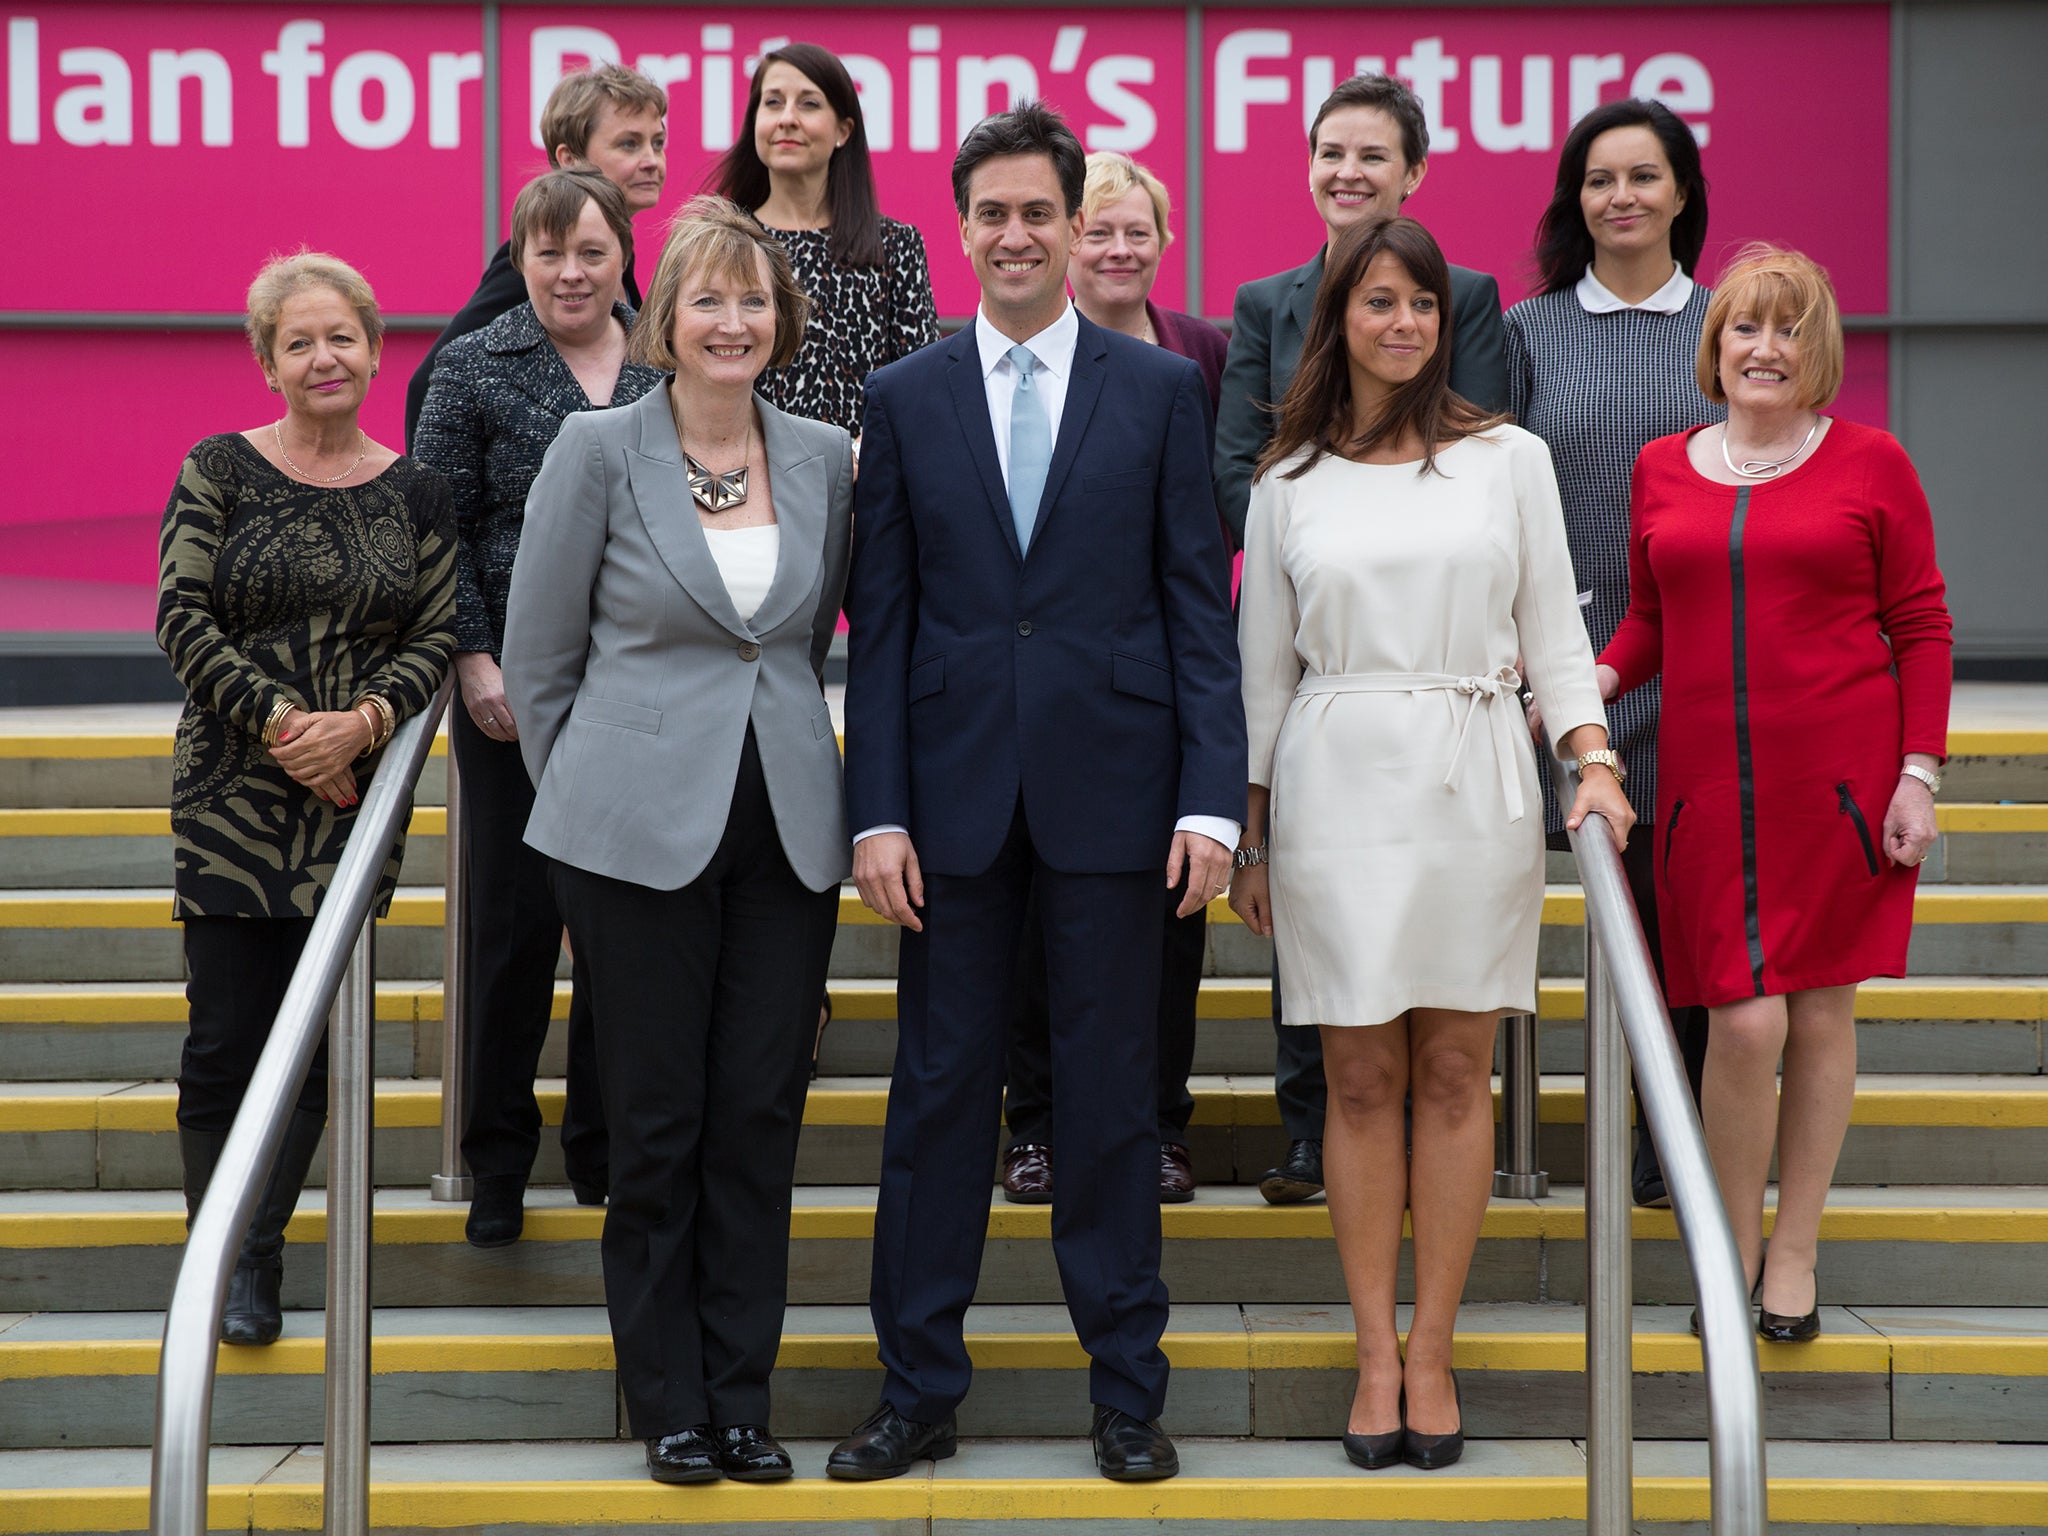 Angela Eagle (directly behind Ed Miliband) is a key female member of the Labour shadow cabinet